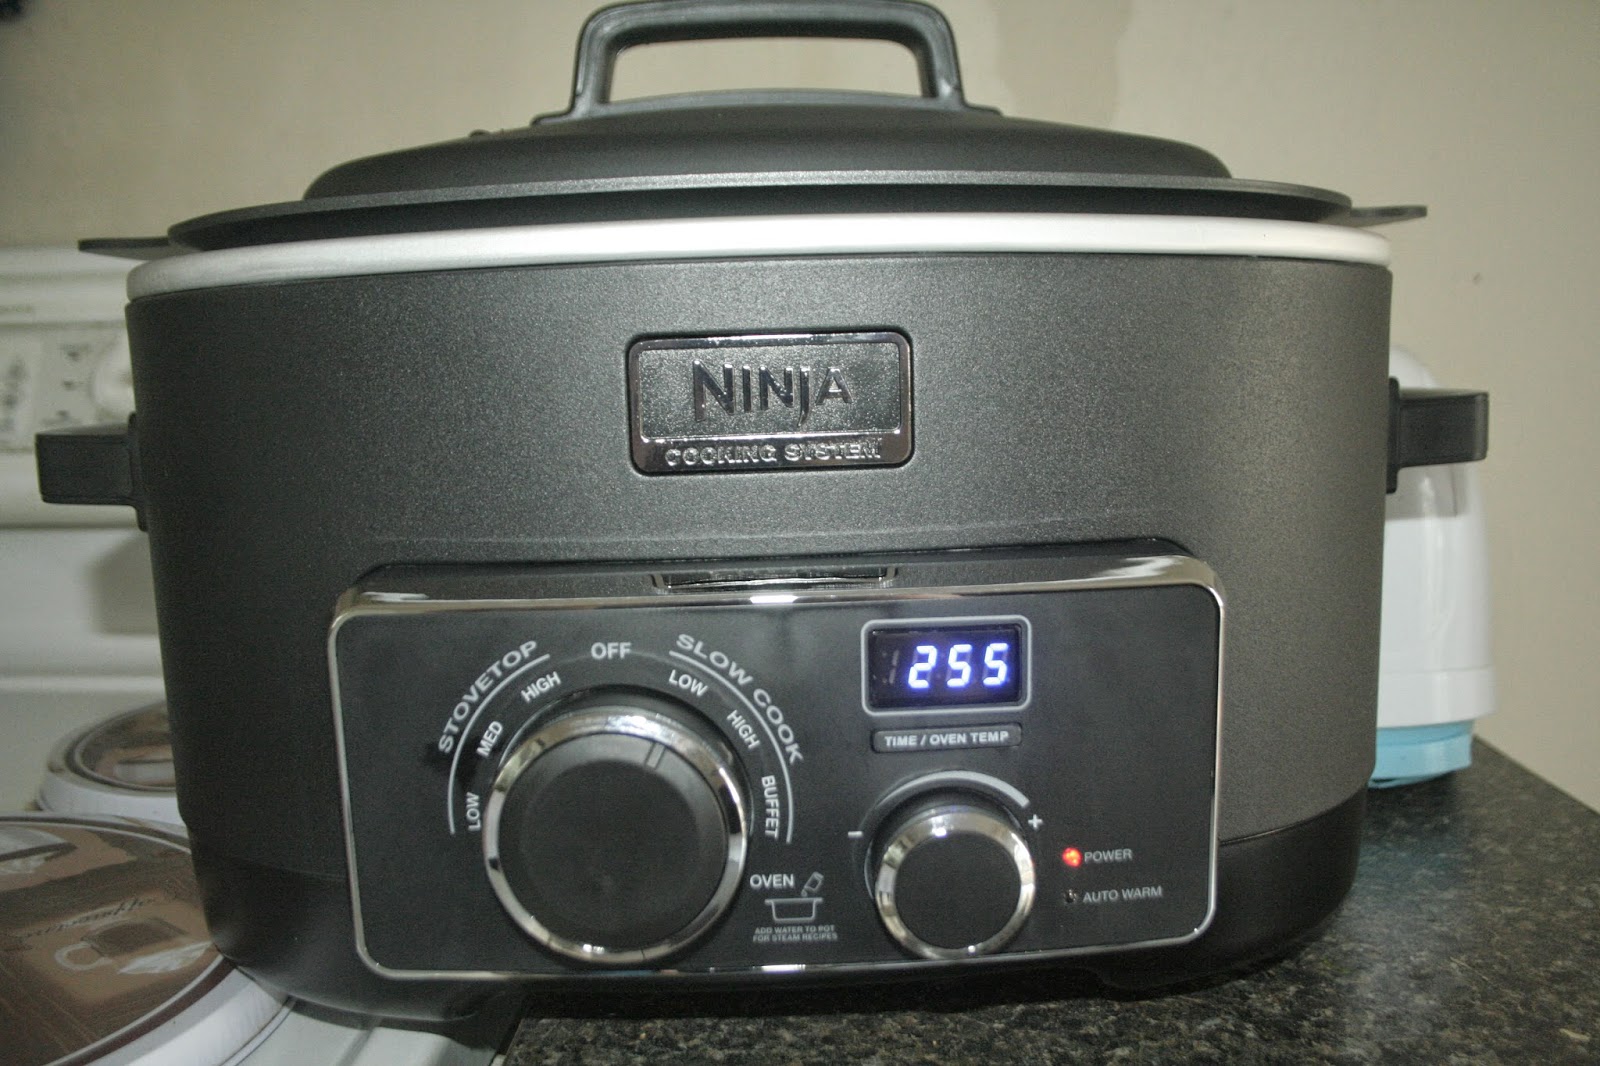 Ninja 3-in-1 Cooking System